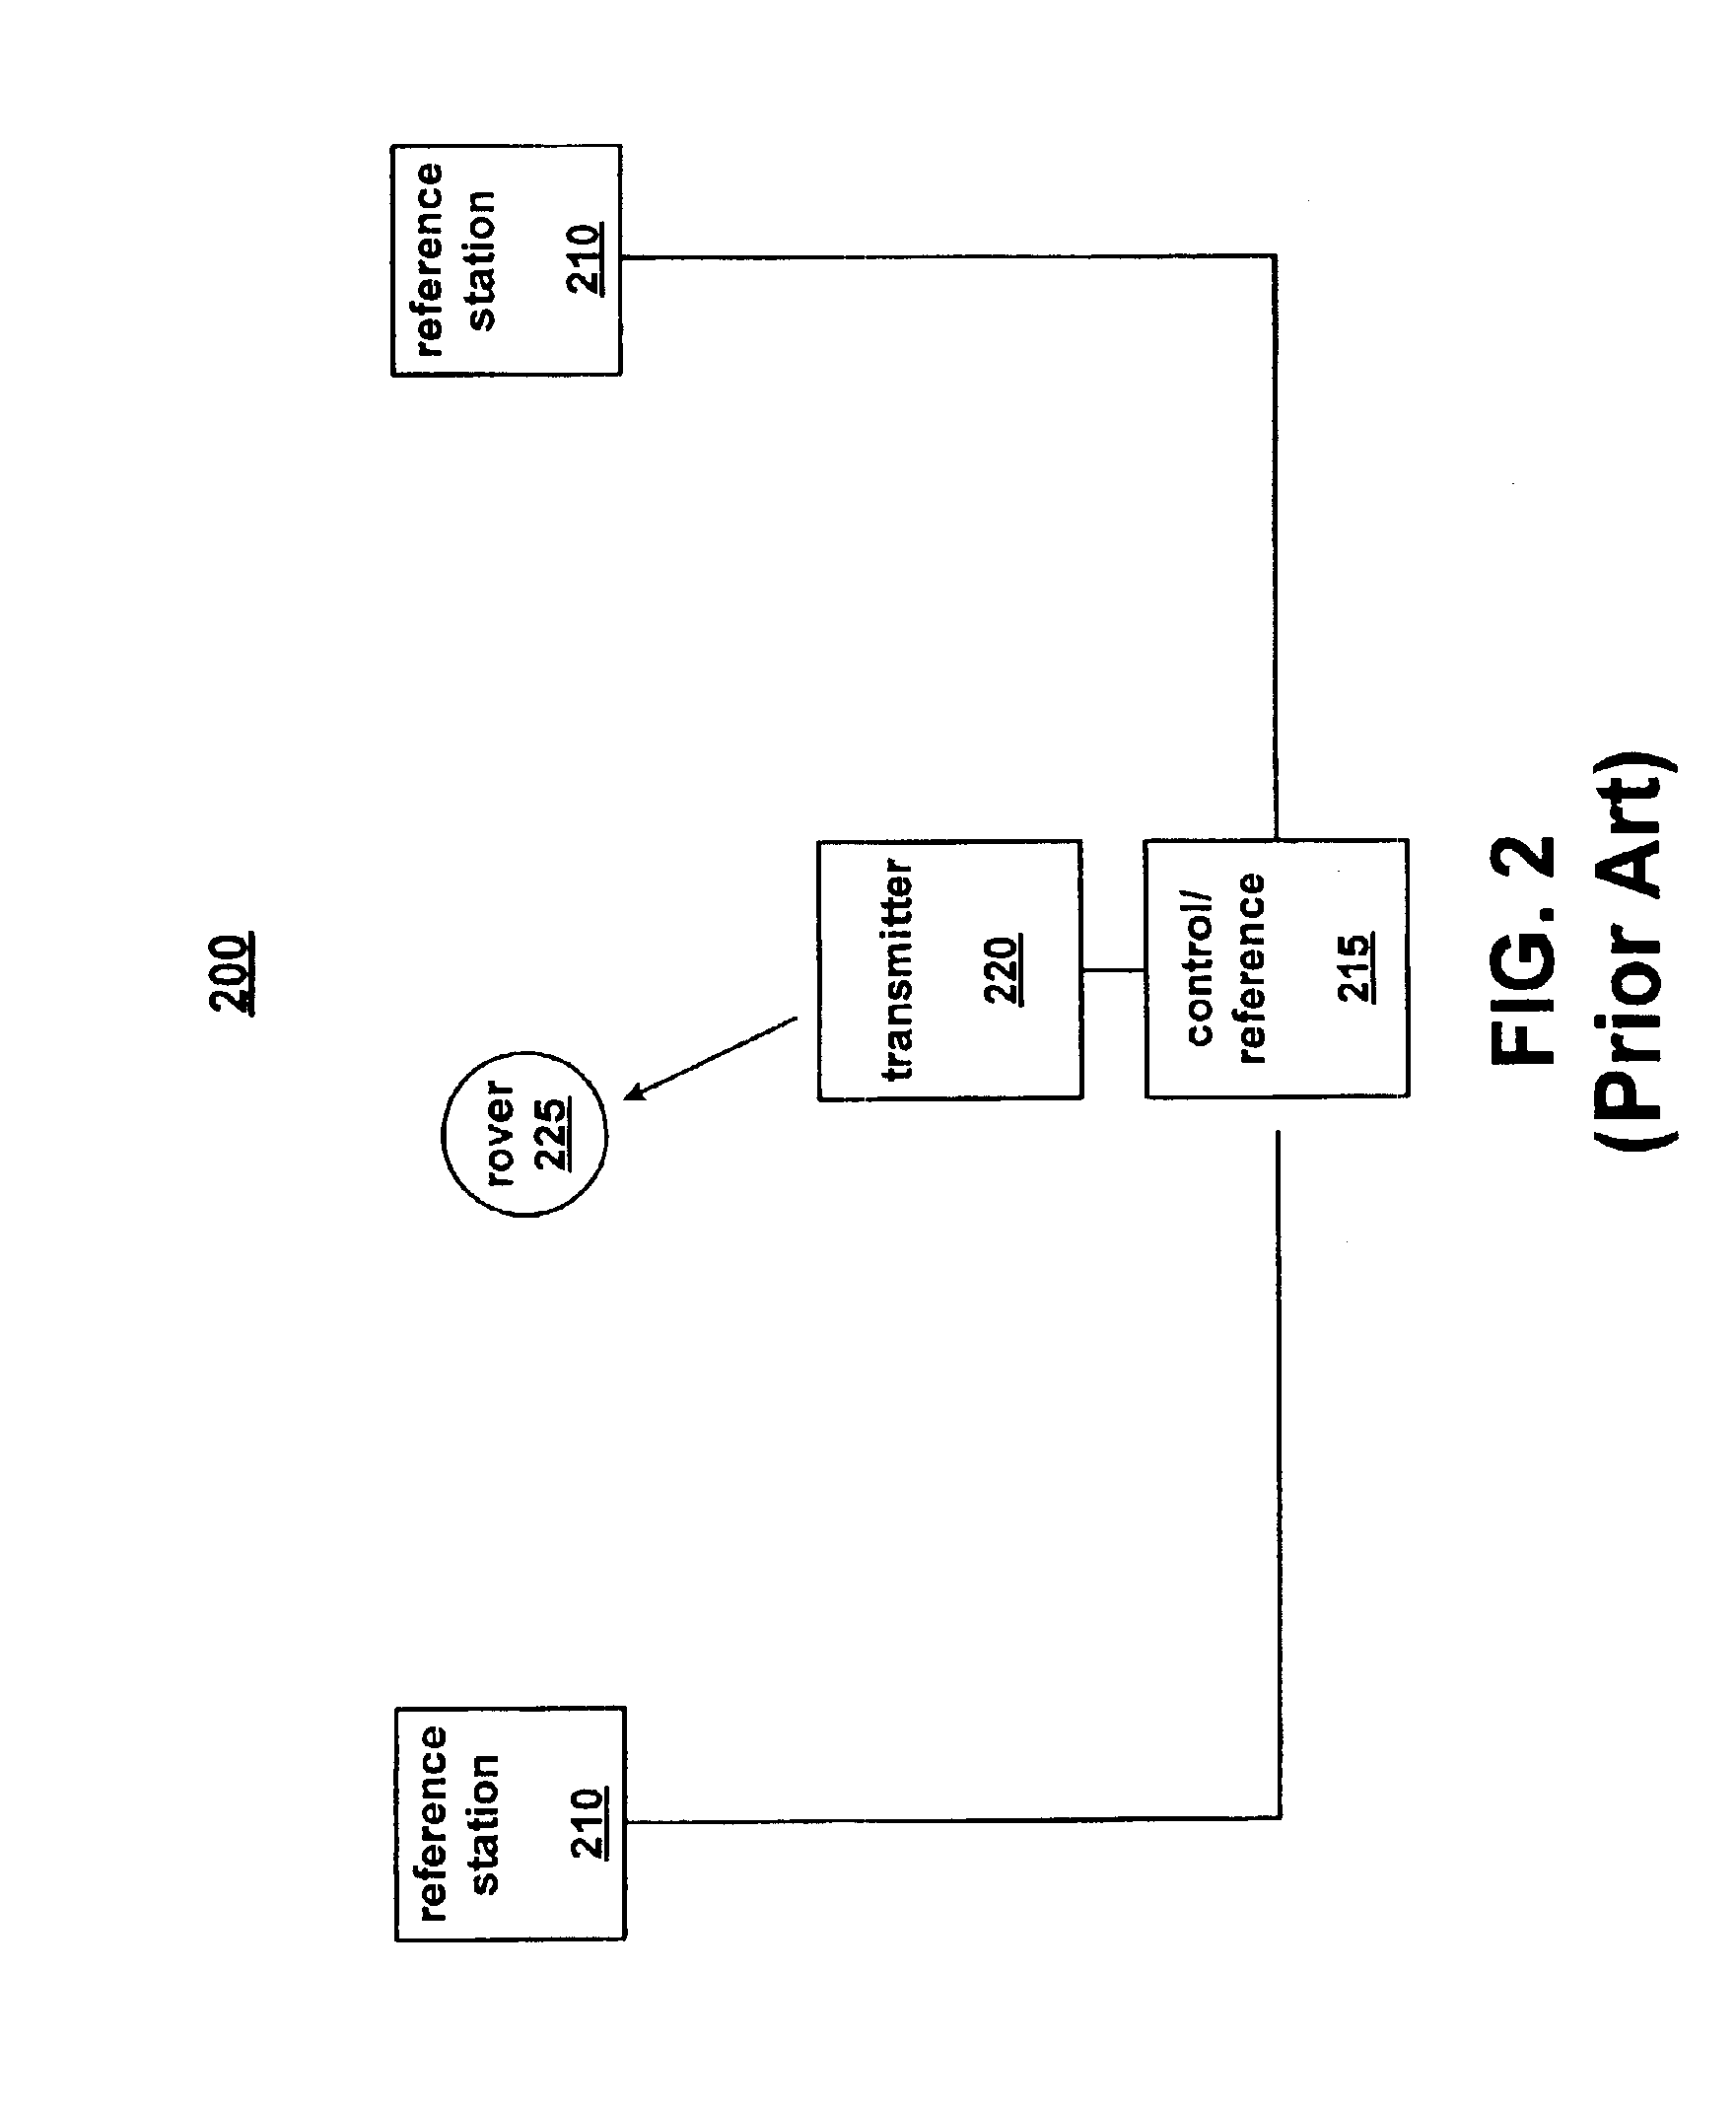 Method and system for transmission of real-time kinematic satellite positioning system data